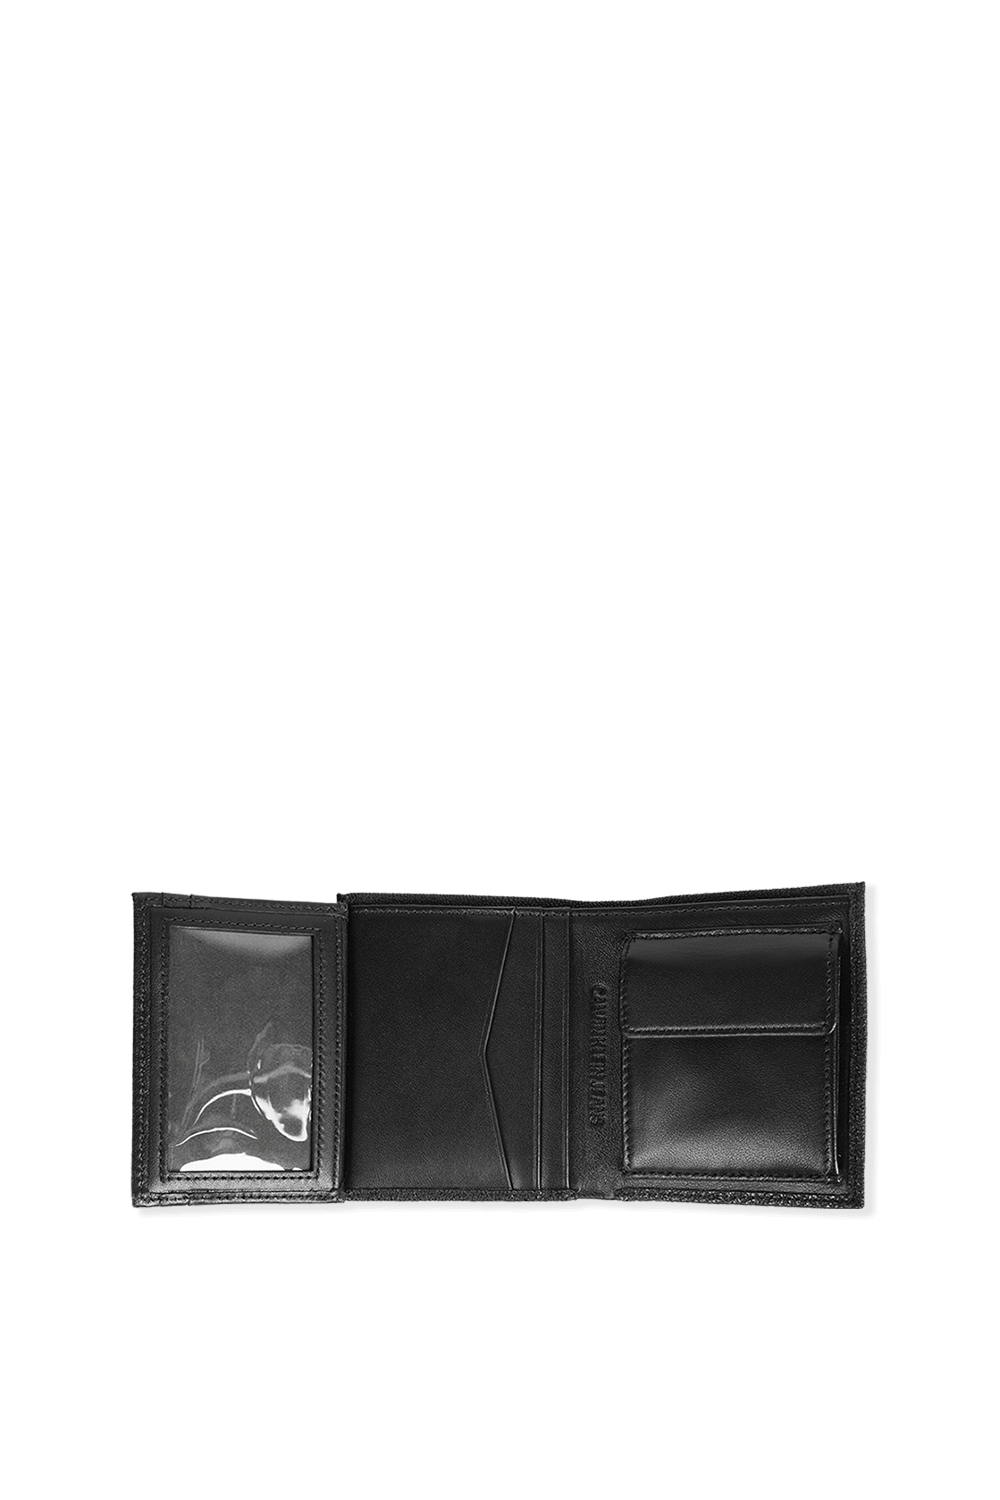 Leather Trifold Wallet in Black CALVIN KLEIN